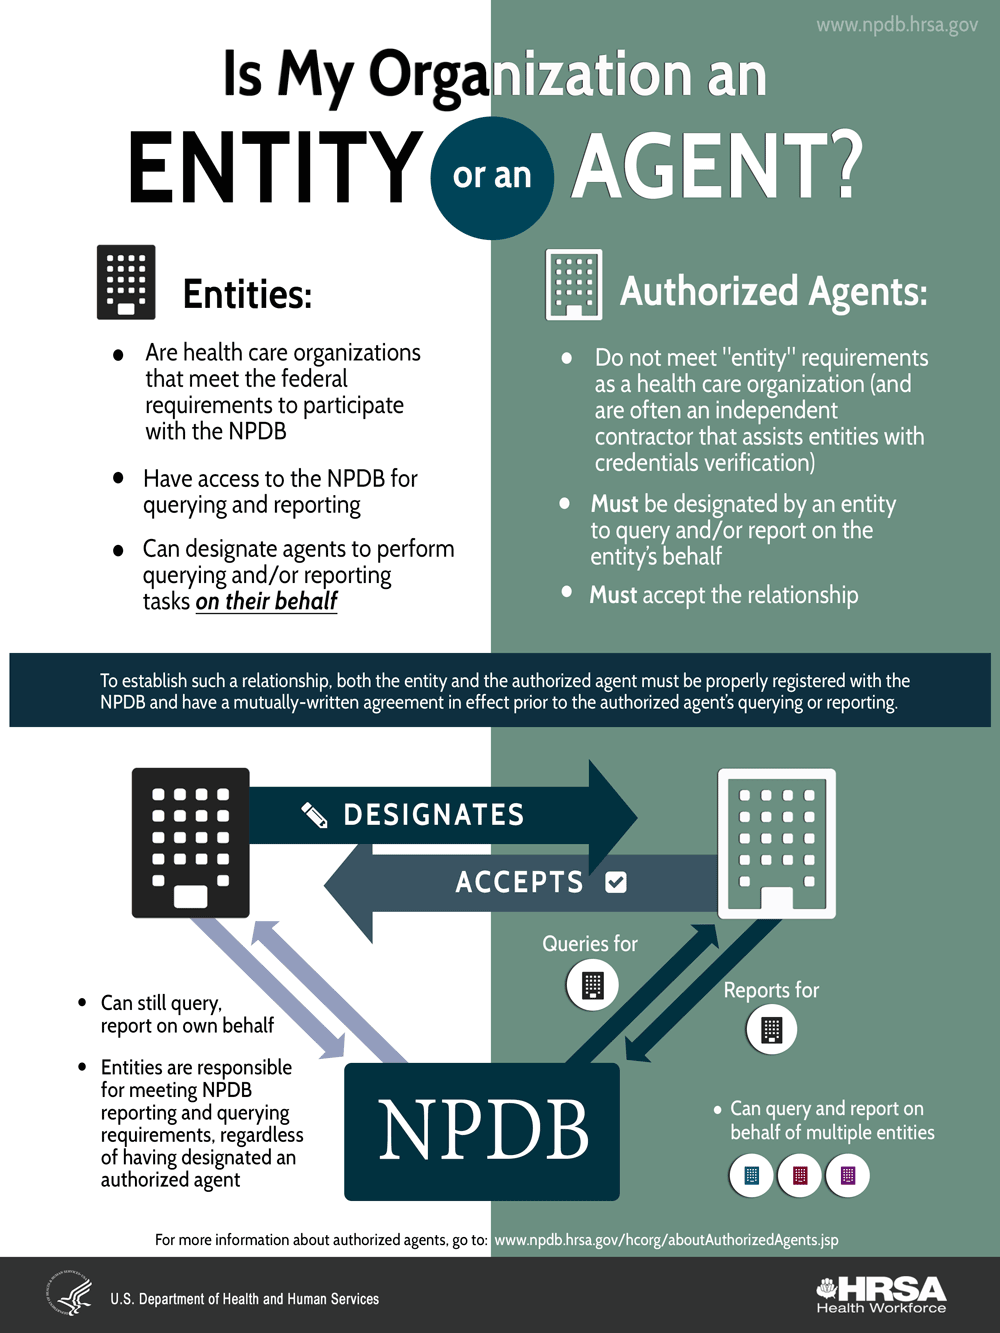 Is My Organization an Entity or Agent Infographic